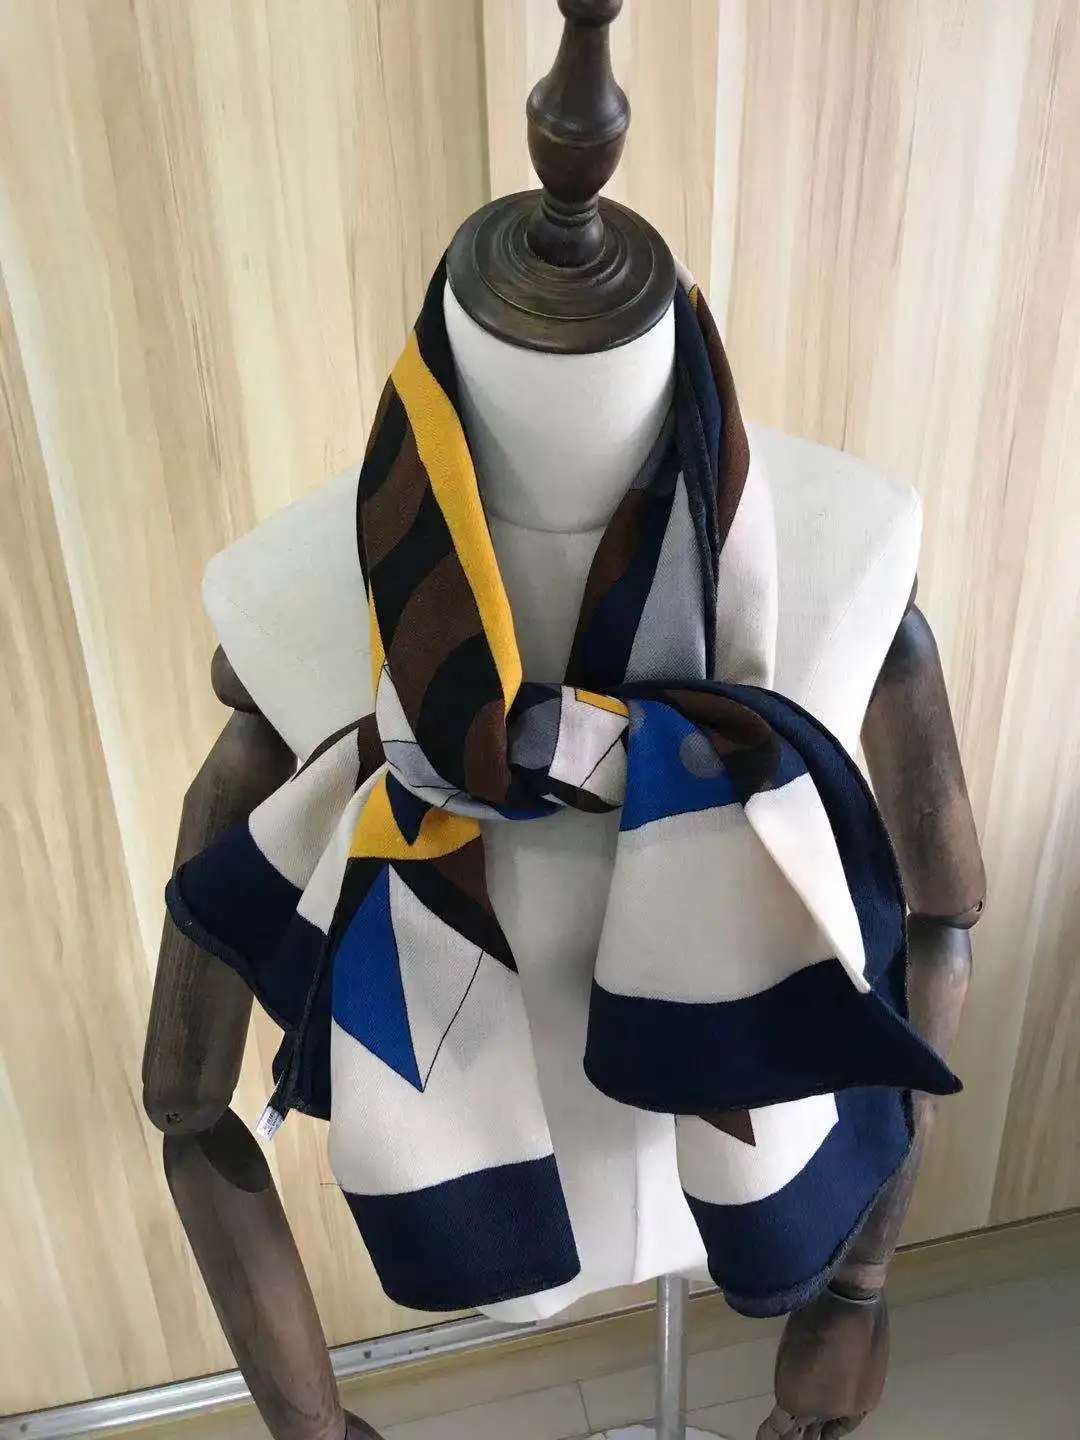 2021 new arrival autumn winter horse 140*140 cm  scarf 70% cashmere 30% silk scarf wrap for women lady girl gift hijab